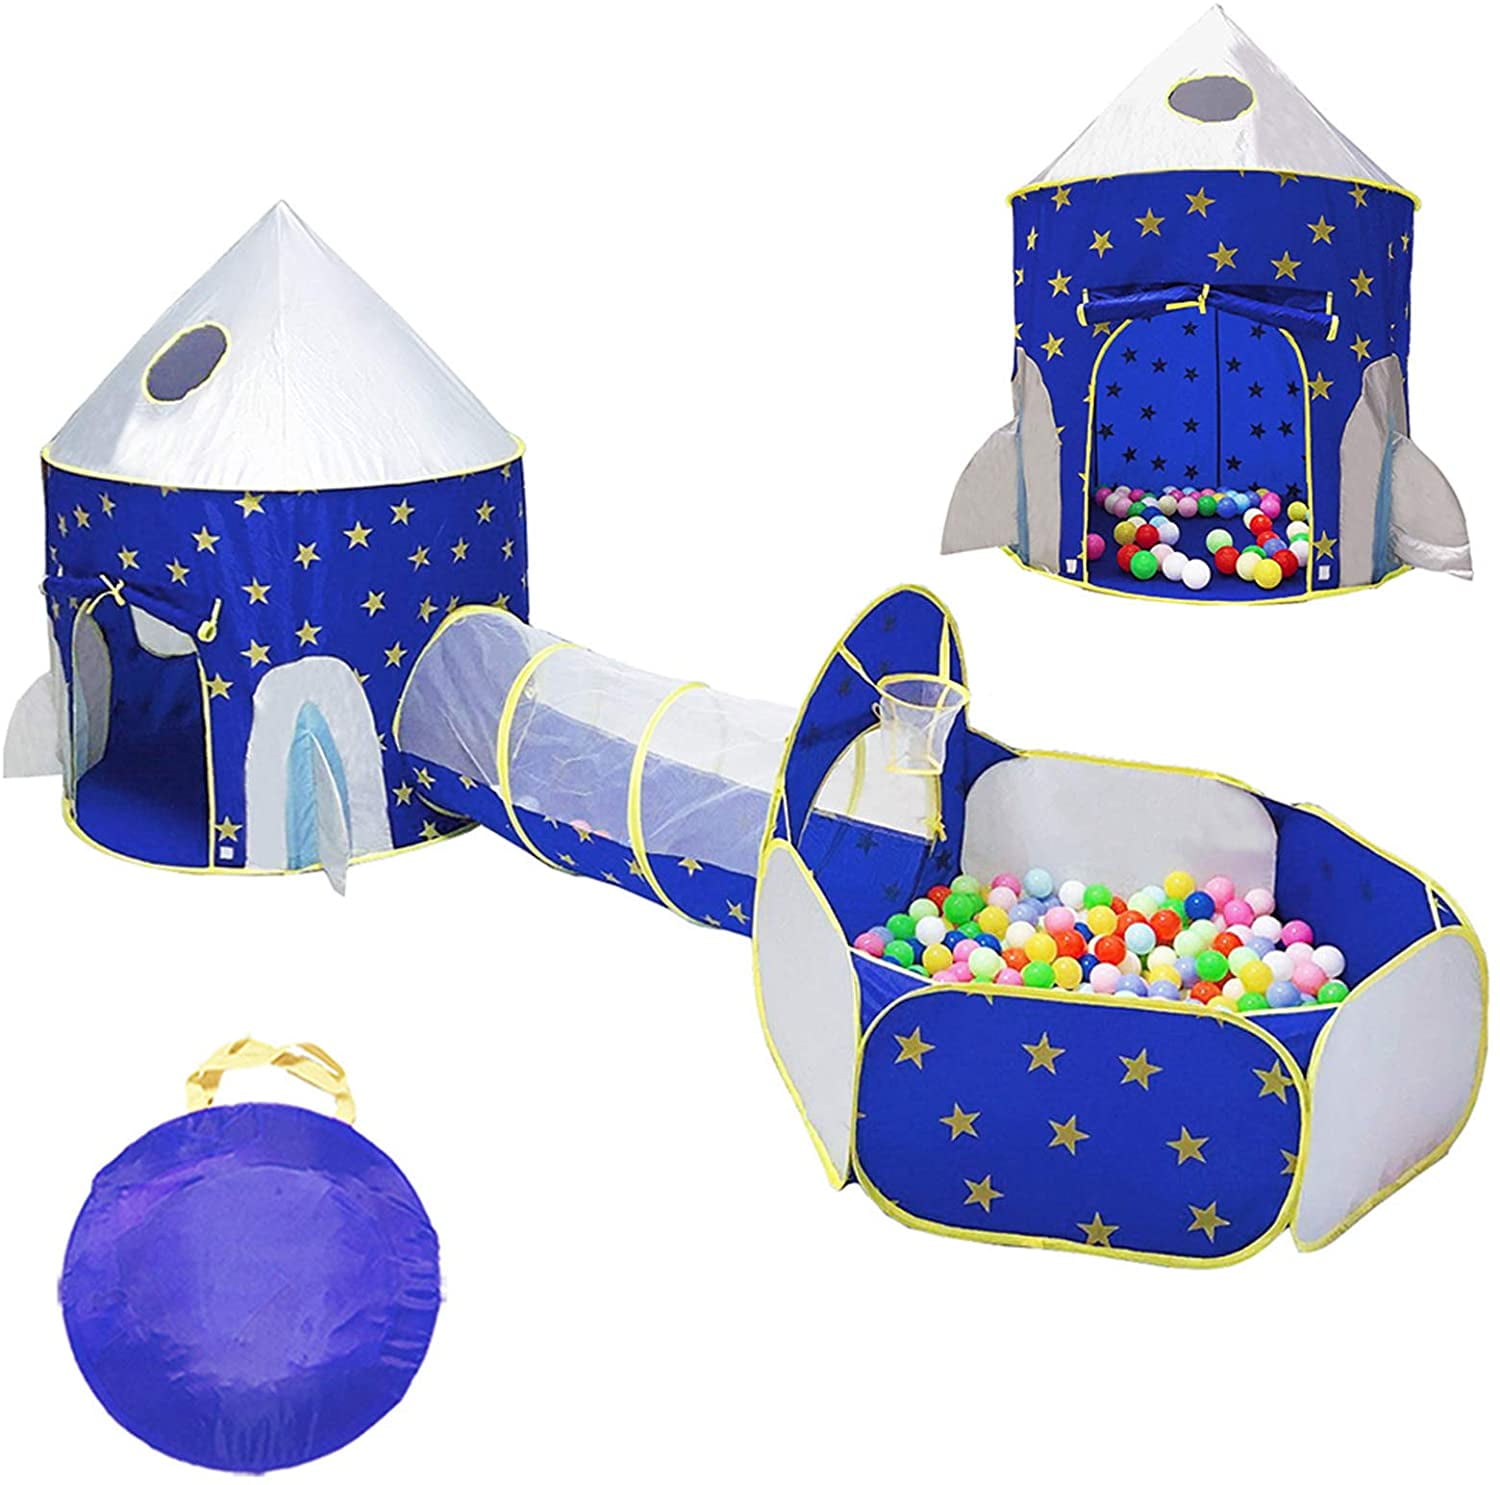 Unicorn Princess Castle Play Tent for Kids Girls /& Pop Up Play Tunnel /& Ball Pit /& Basketball Hoop Gift for Girls Playhouse with Drawing Book Toys for Girls Outdoor Indoor Play